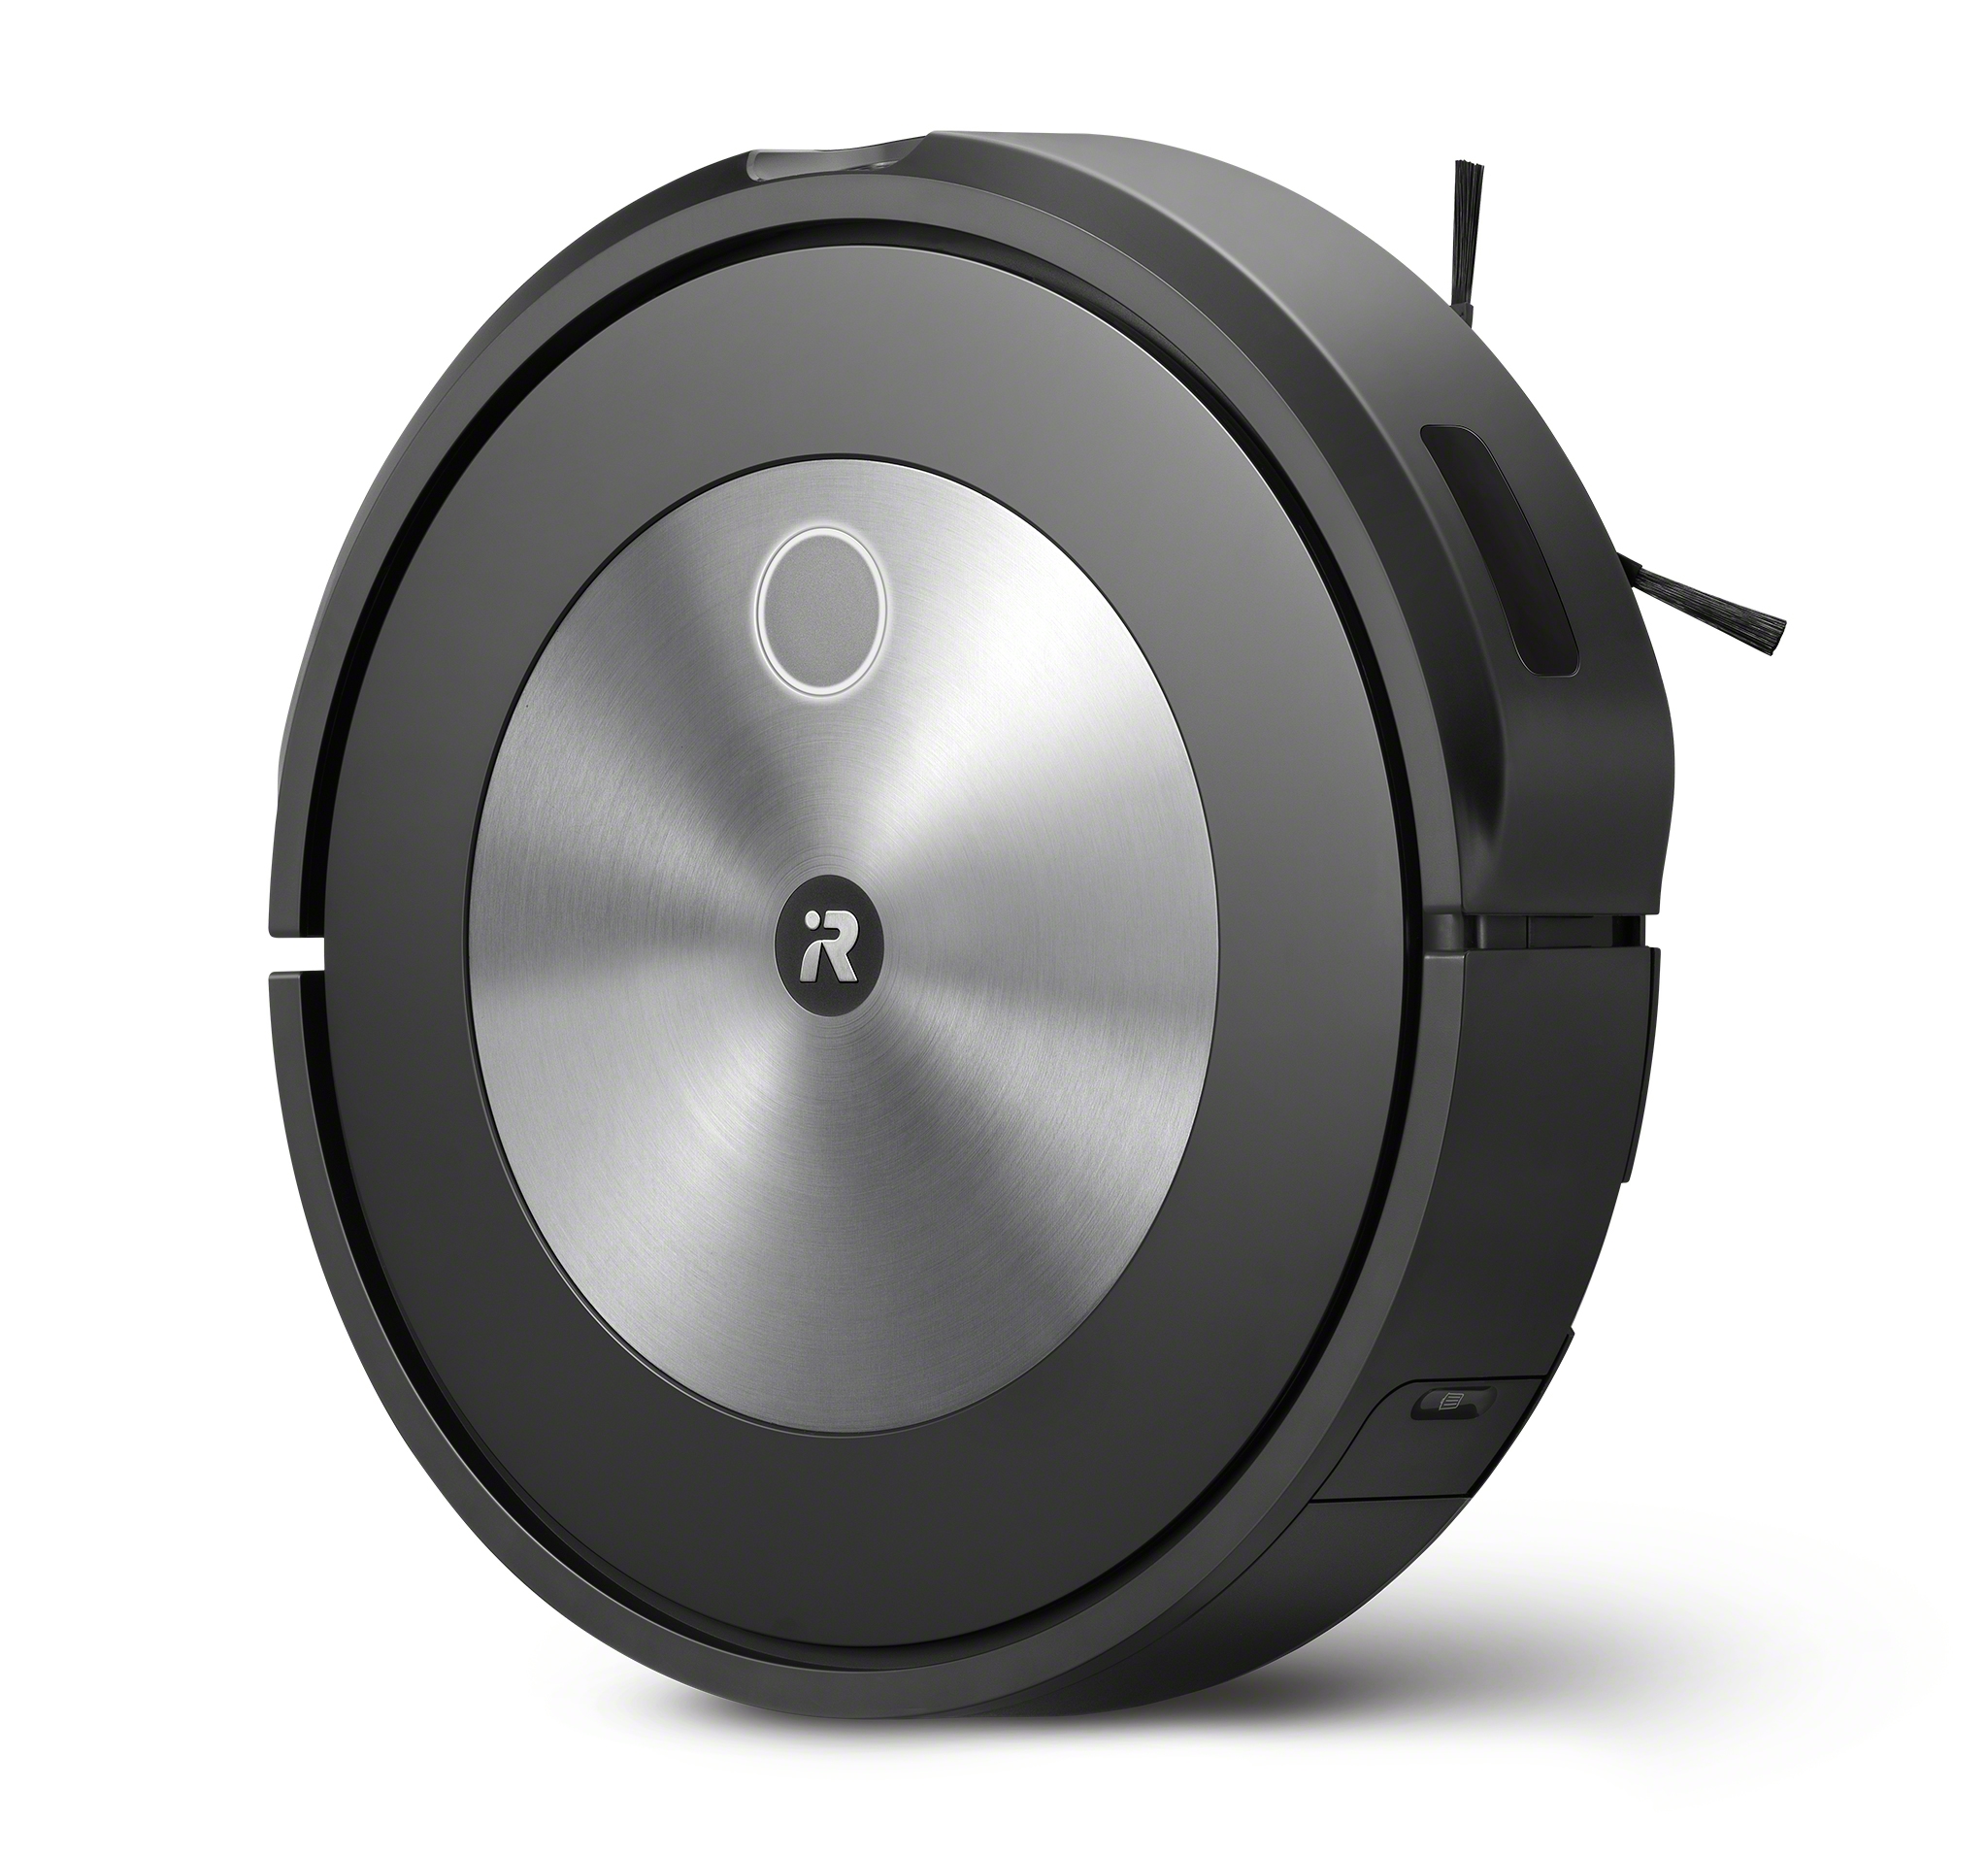 The iRobot Roomba j7+ robot vacuum is thoughtfully designed to blend into the home. The robot features an appealing spun metal finish and intuitive one-button design. Powered by iRobot Genius™ 3.0 Home Intelligence and featuring PrecisionVision Navigation, the Roomba j7+ gets smarter with each use.